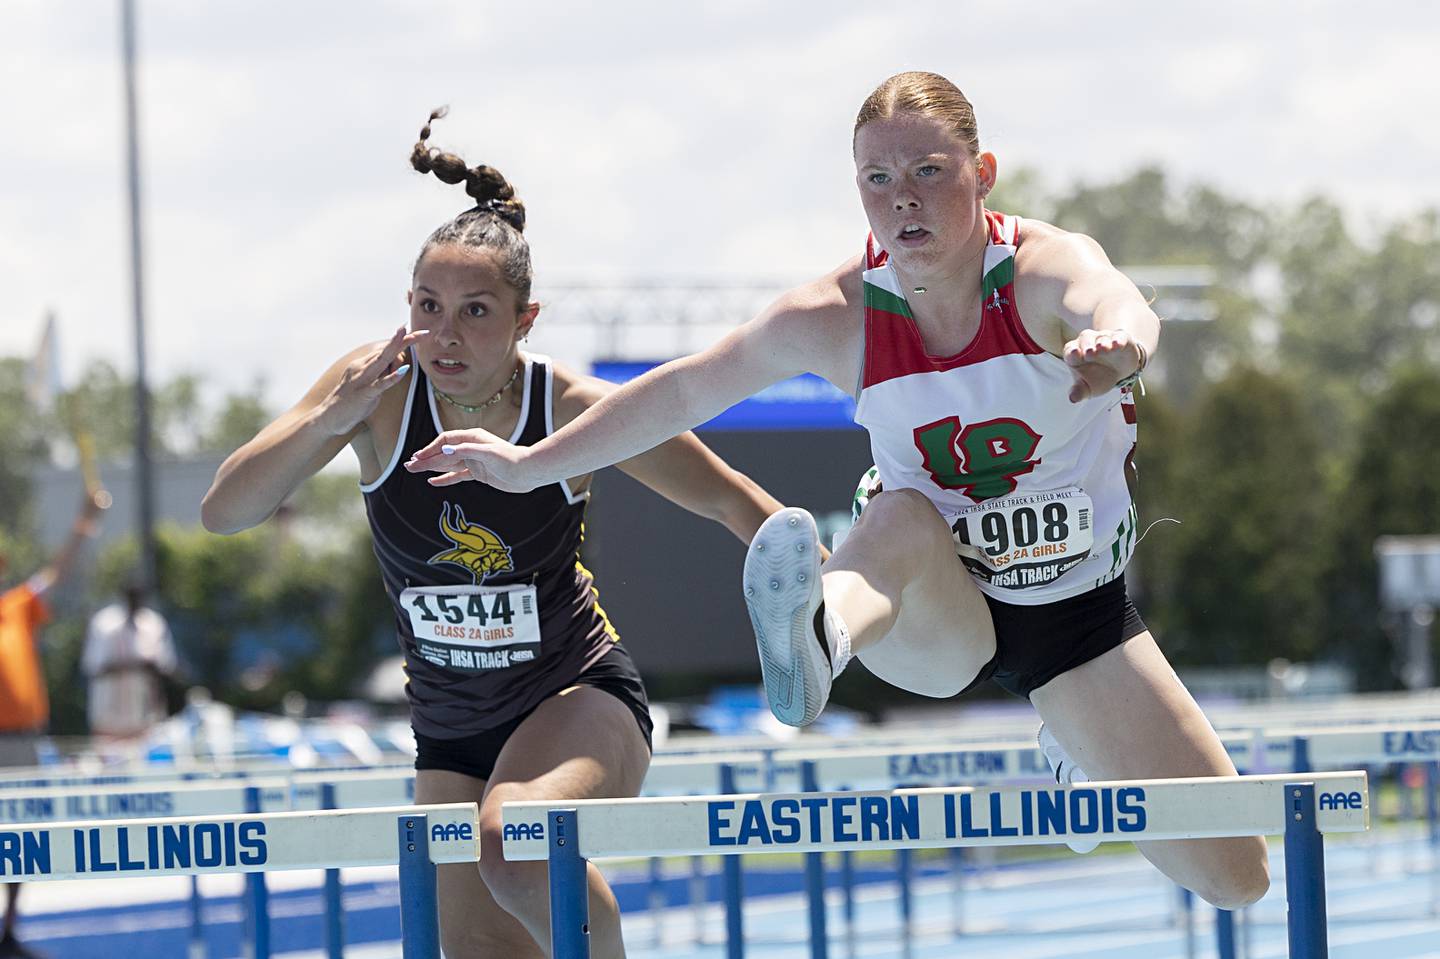 Lasalle-Peru’s Elli Sines clears the final hurdle in the 2A 100 Hurdles race Saturday in May at the IHSA girls state track meet in Charleston.